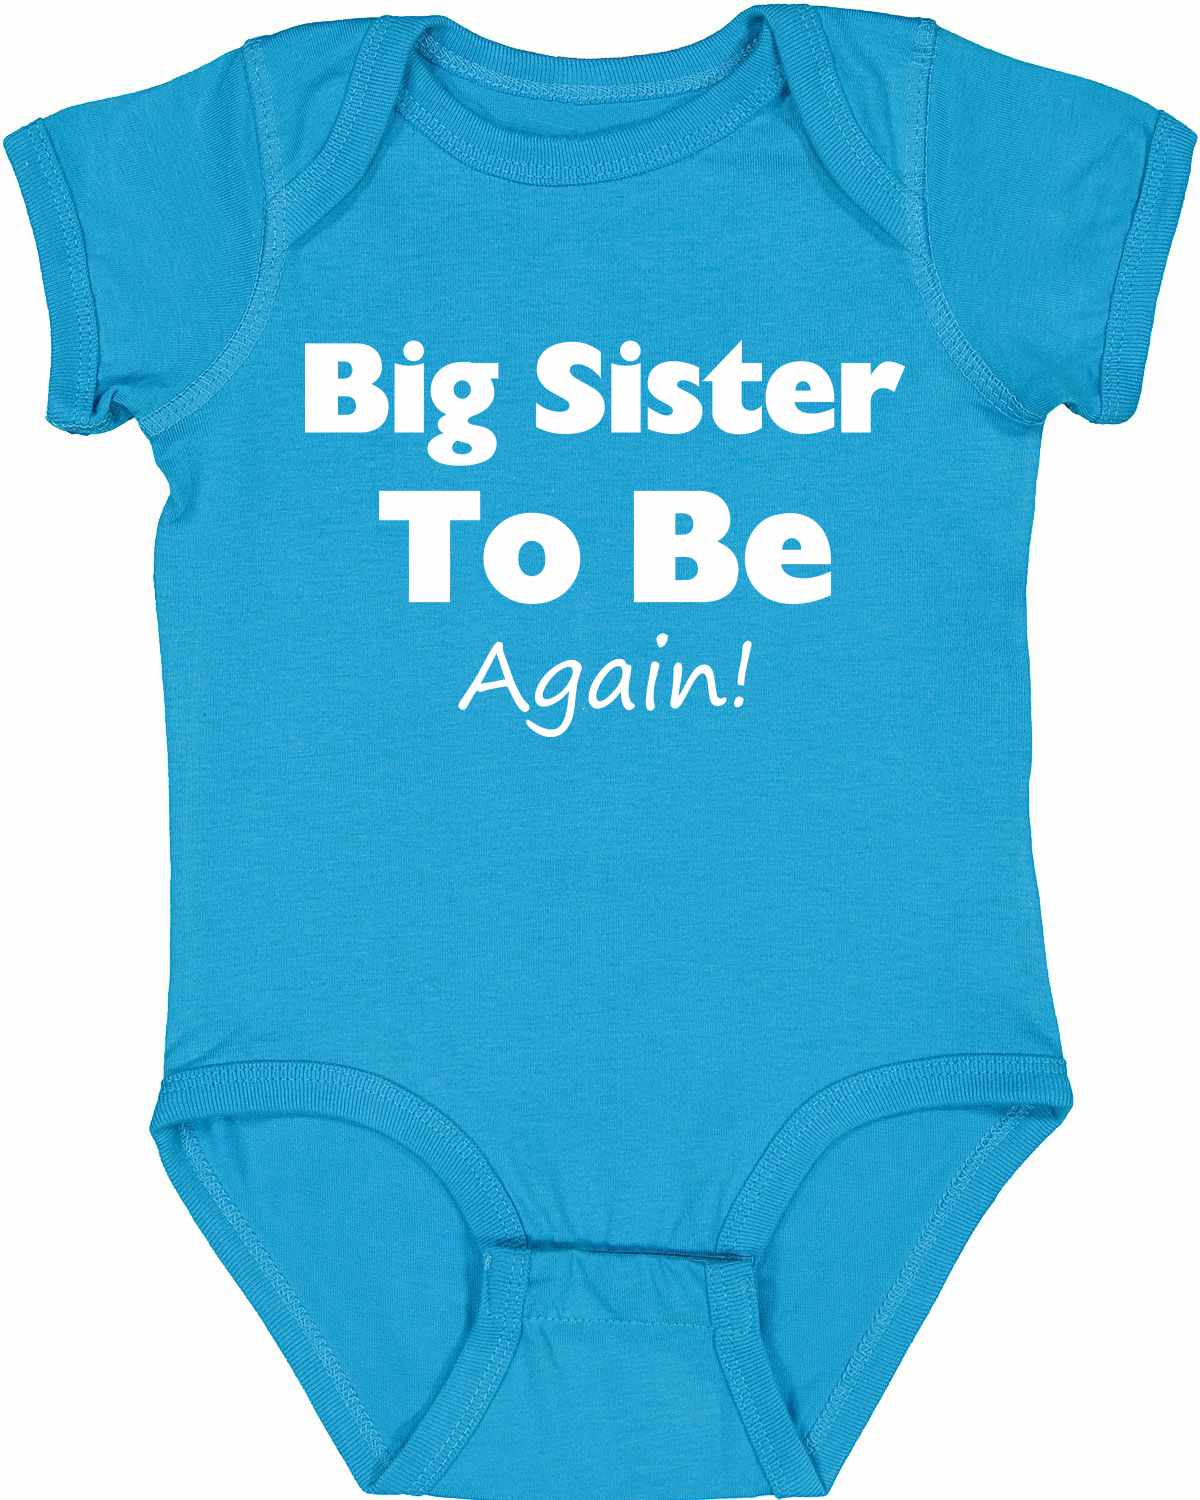 Big Sister To Be Again on Infant BodySuit (#877-10)